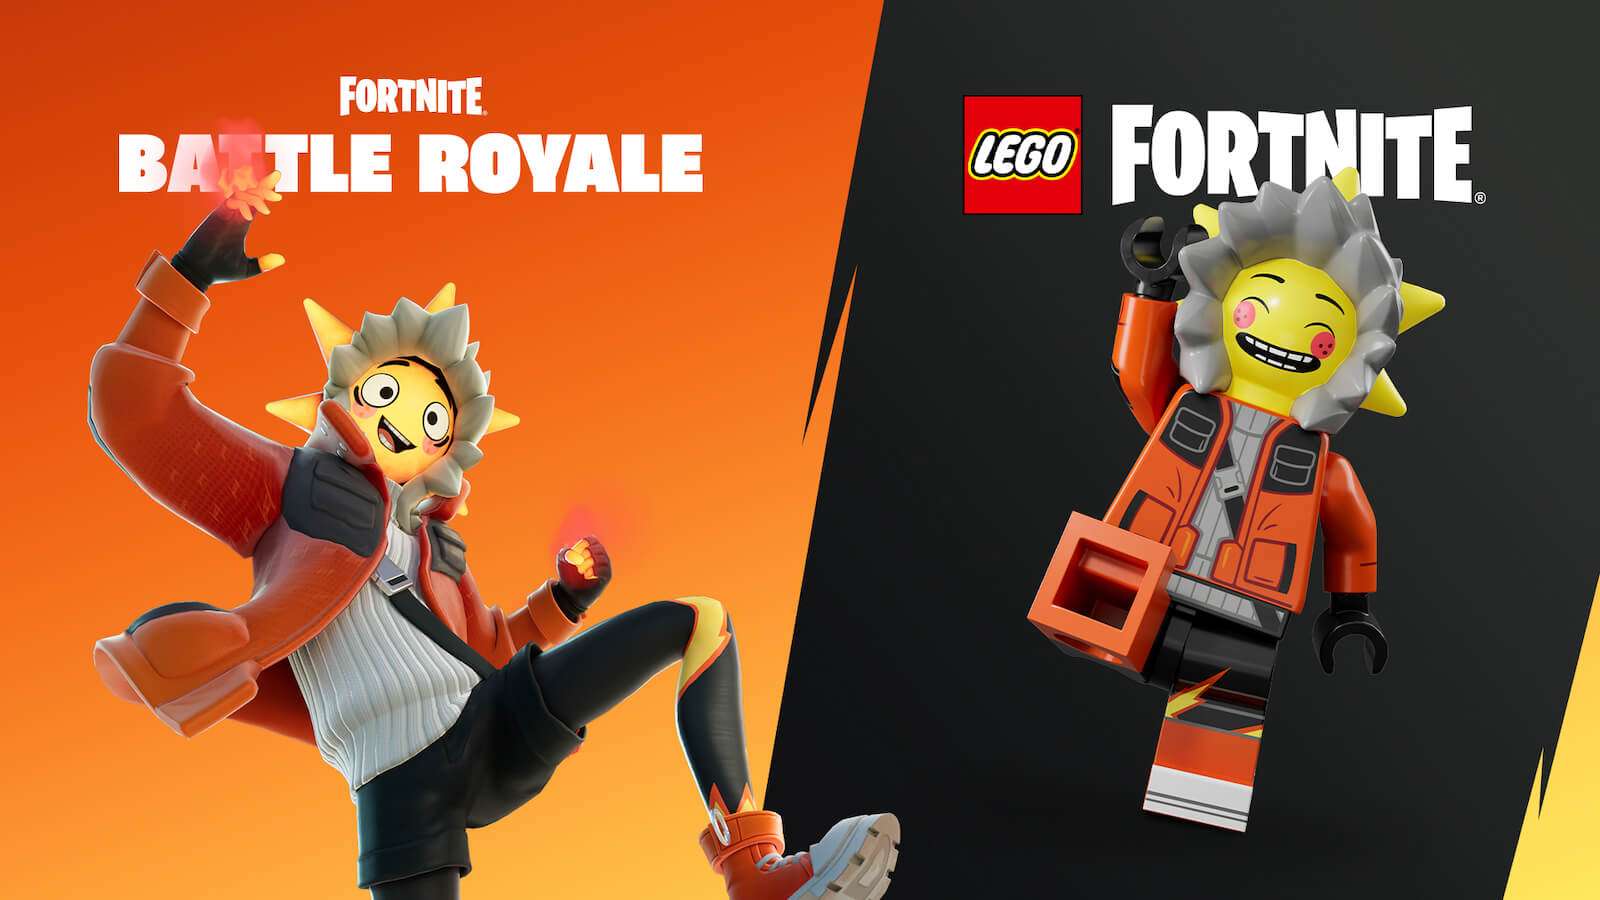 Fortnite player claims LEGO collab "killed" the Item Shop